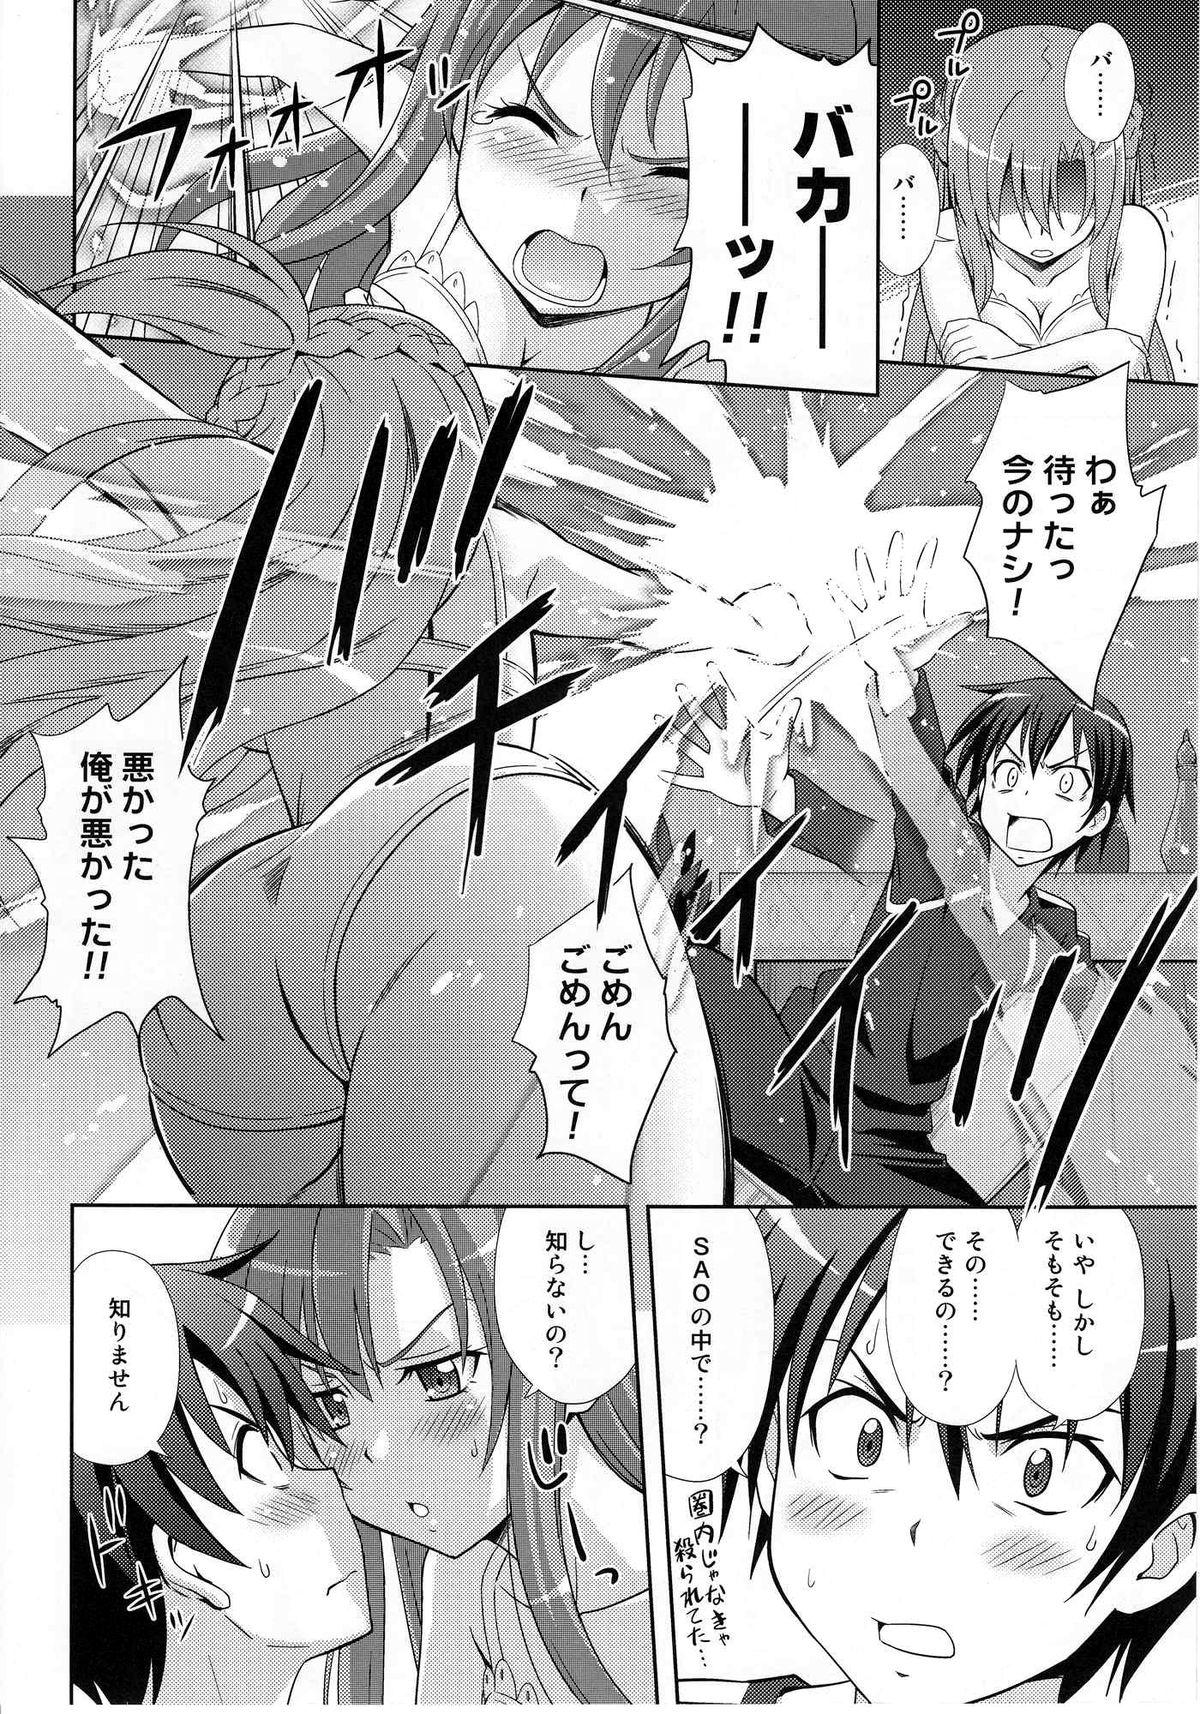 Married LOVE BIRDS - Sword art online Awesome - Page 5